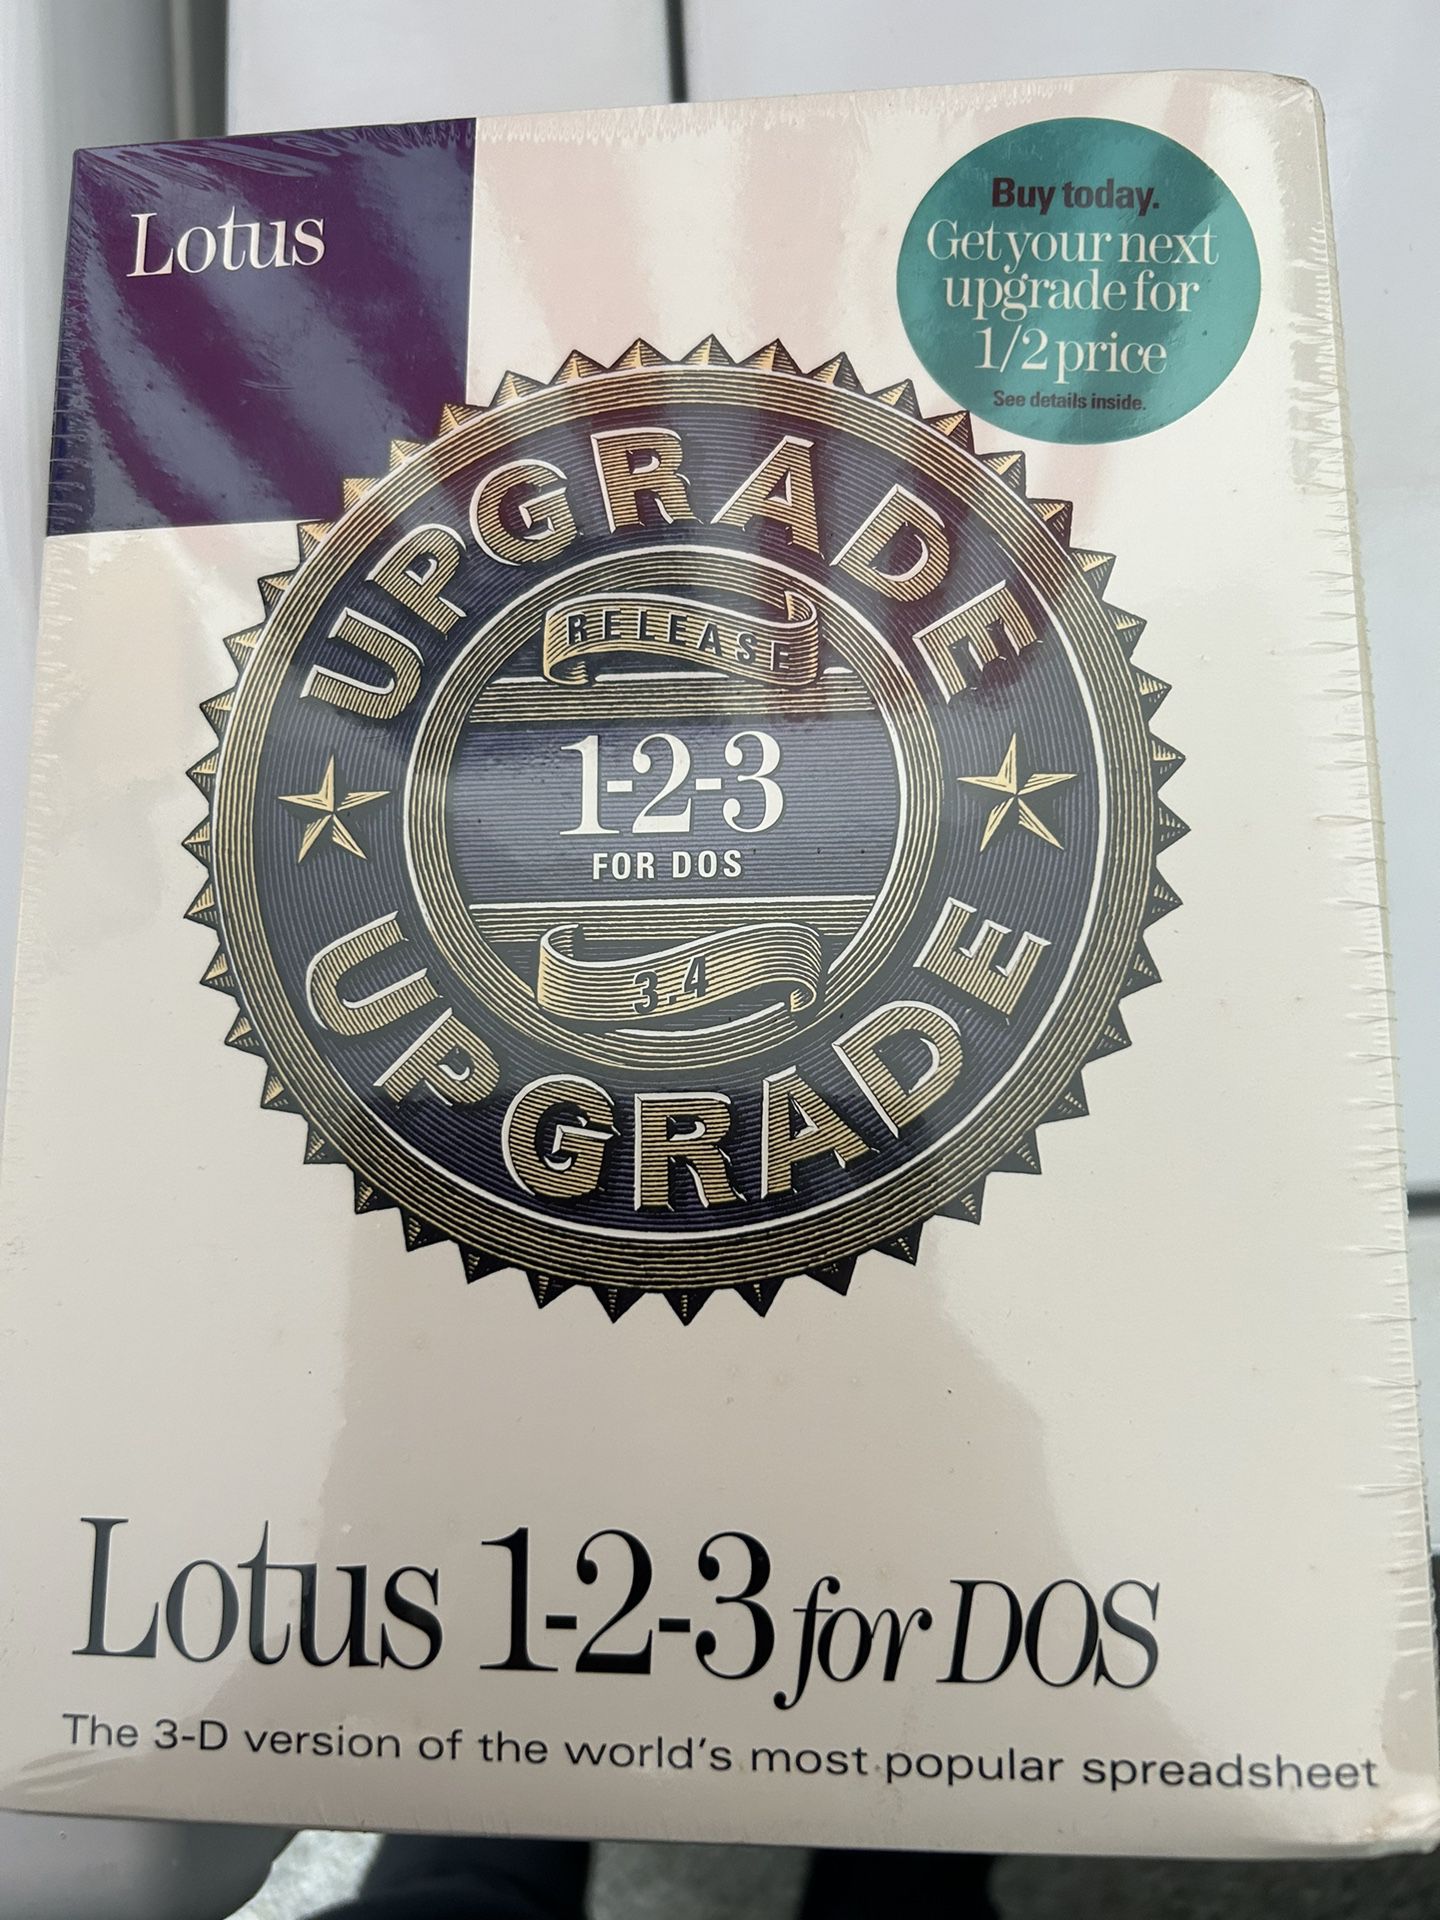 Lotus 1-2-3 For DOS Release 3.4